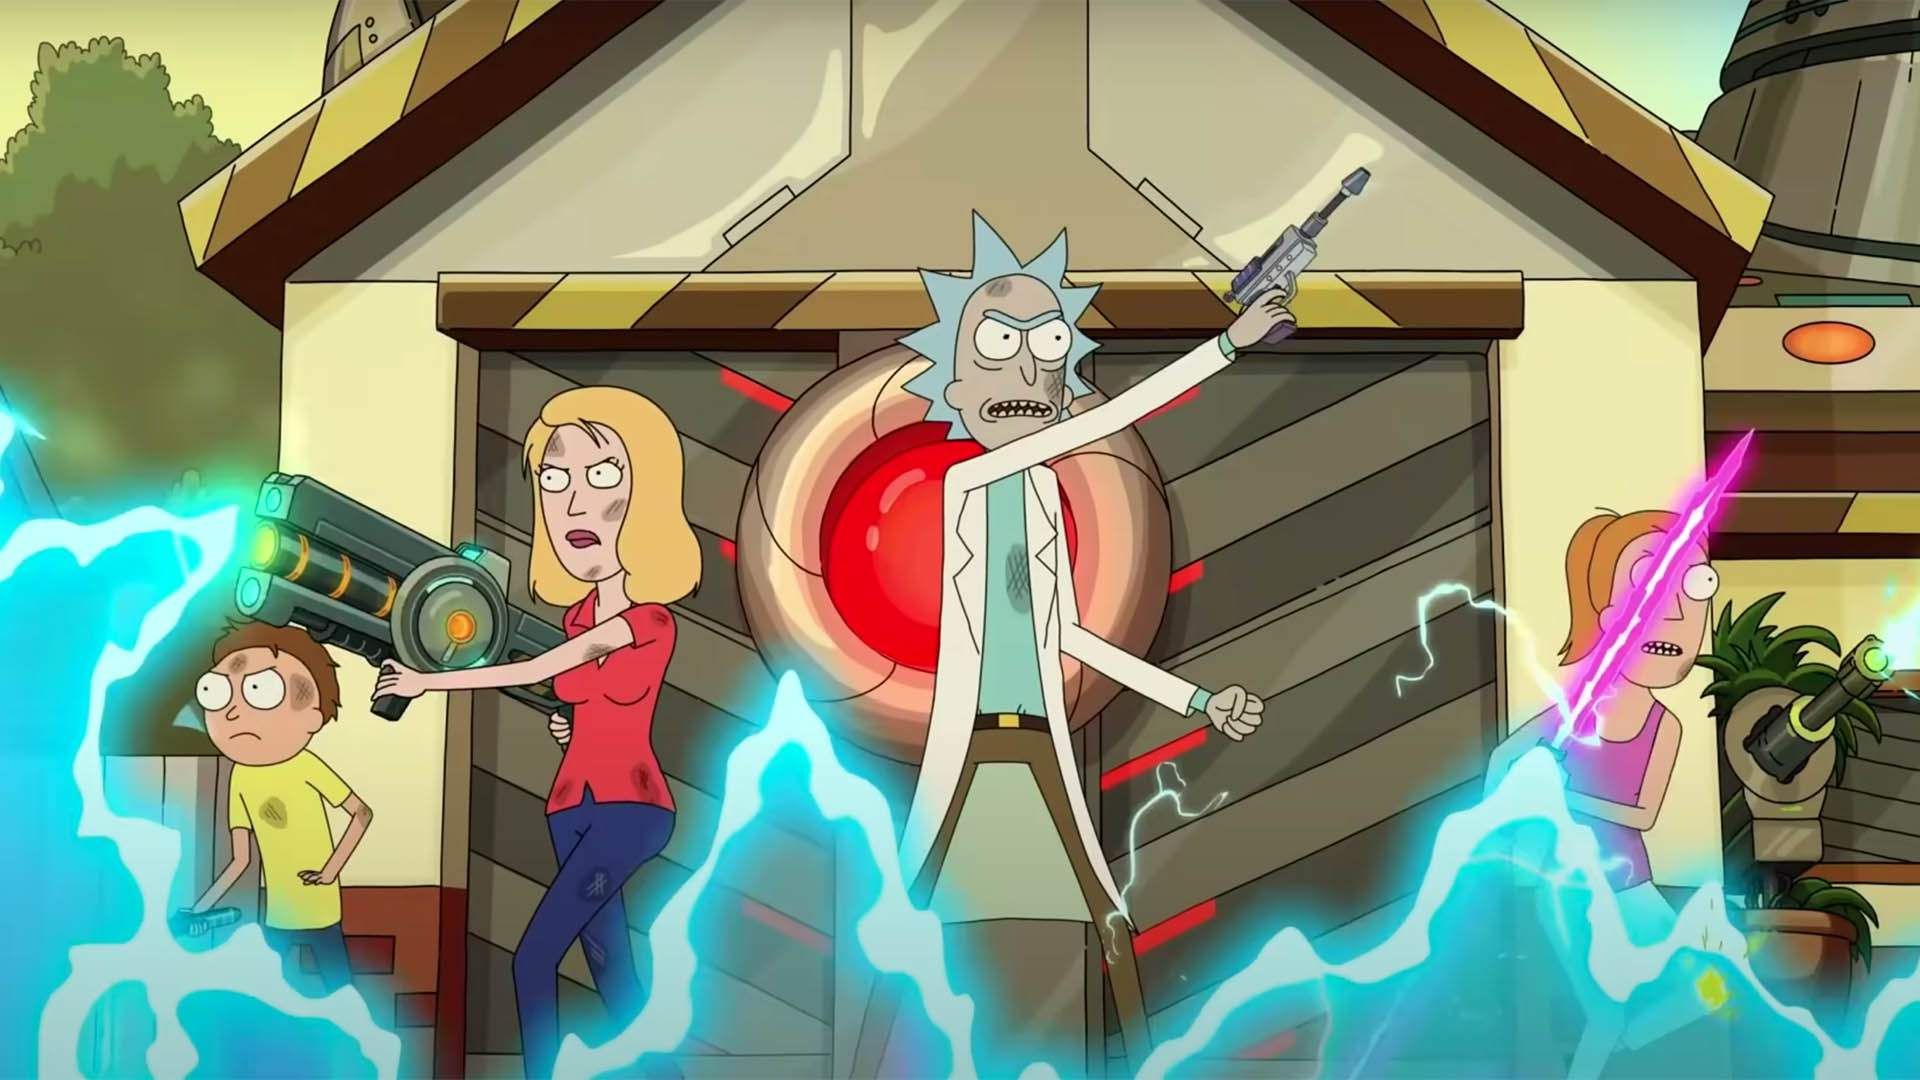 The New 'Rick and Morty' Season Five Trailer Teases Battles, Parodies